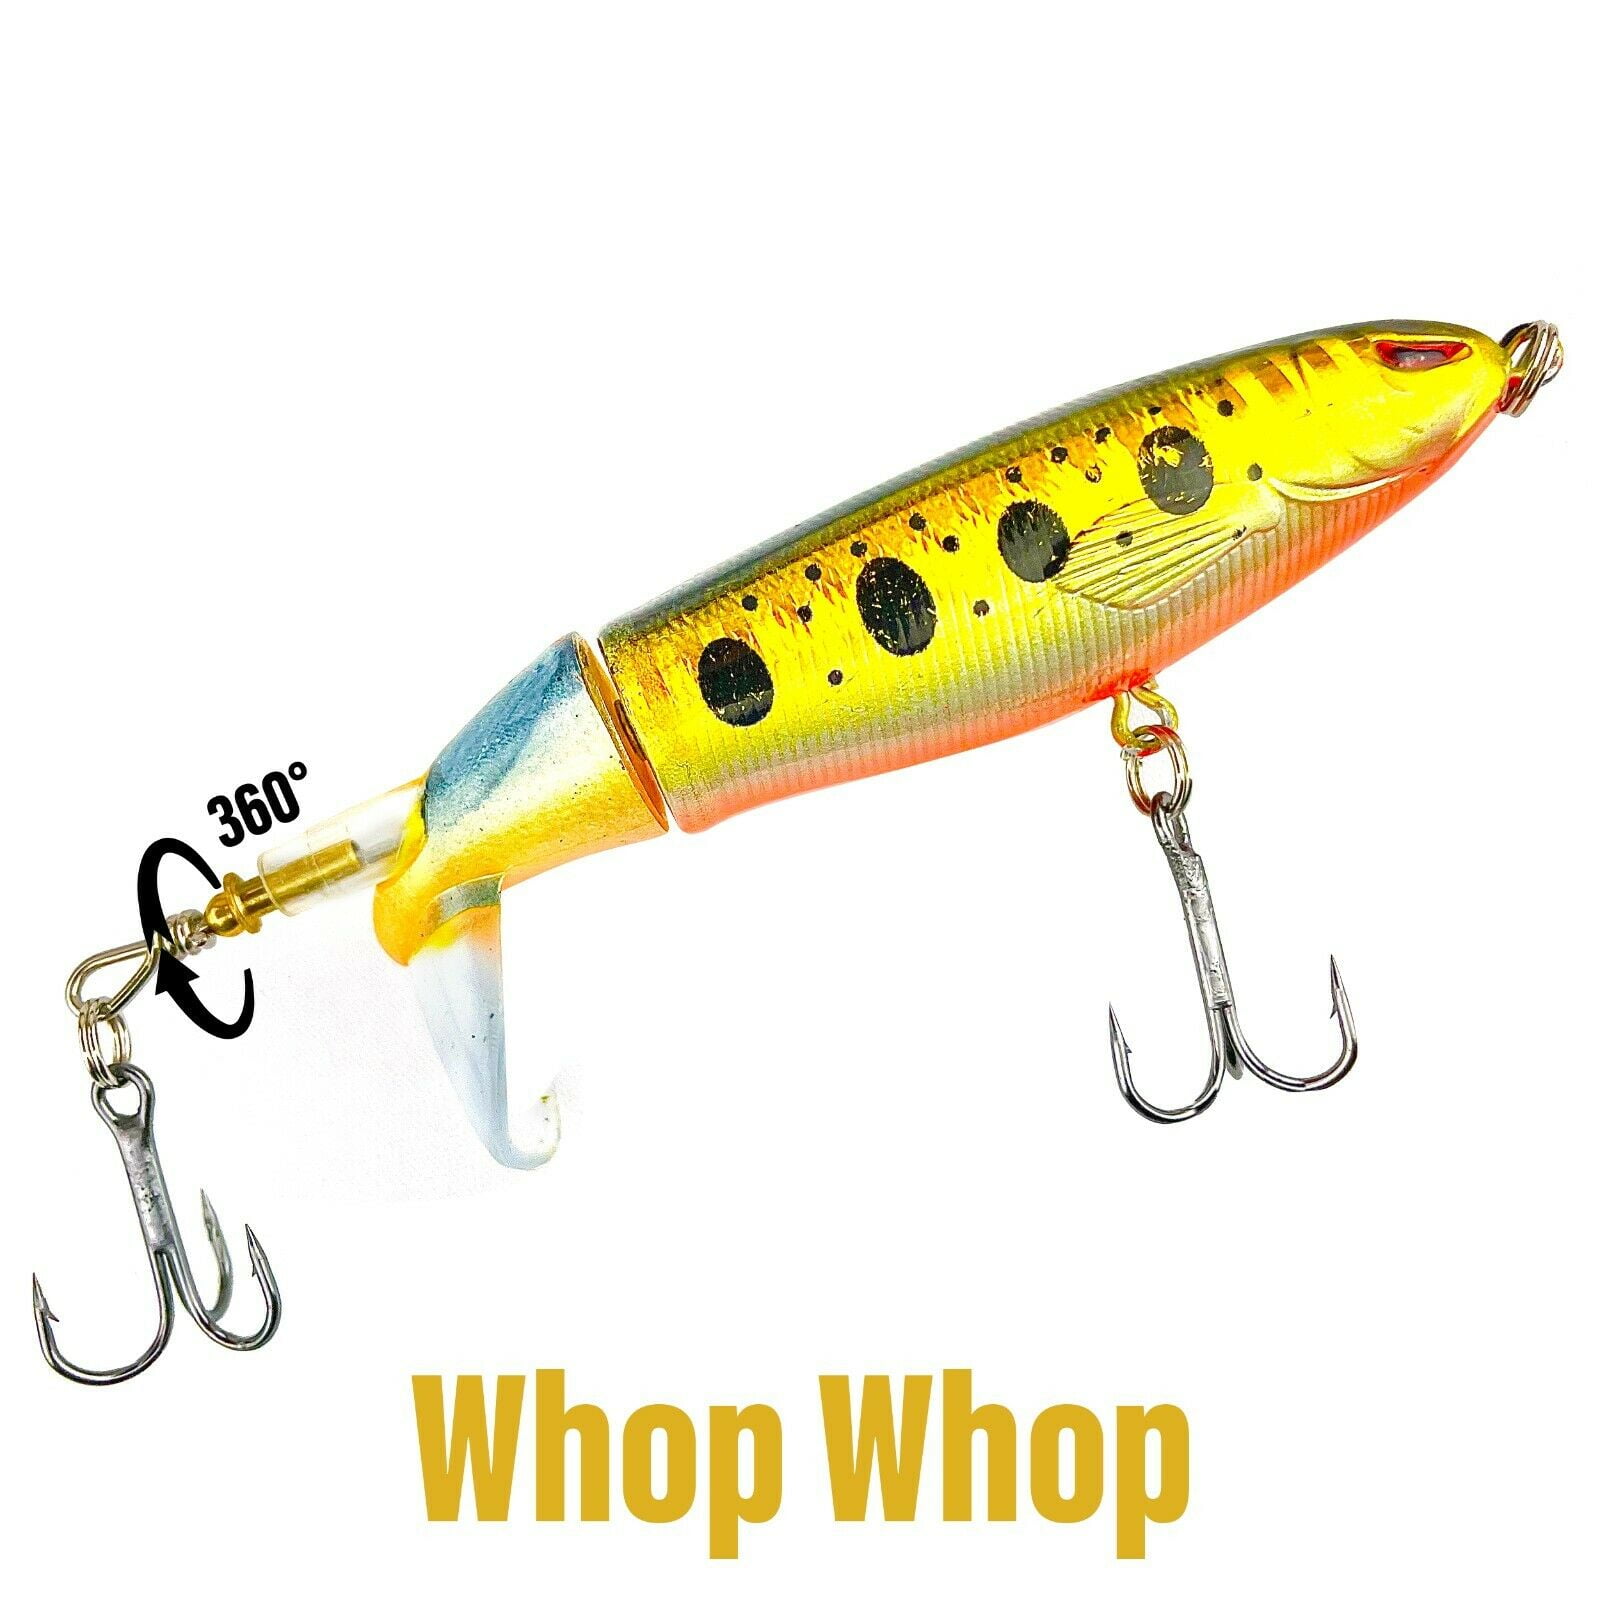 Whopper Plopper Topwater Fishing Lures Floating Pencil 3 Joint Swimbait  Rotating Tail Megabass Bait Wobblers Bait for Pike Perch